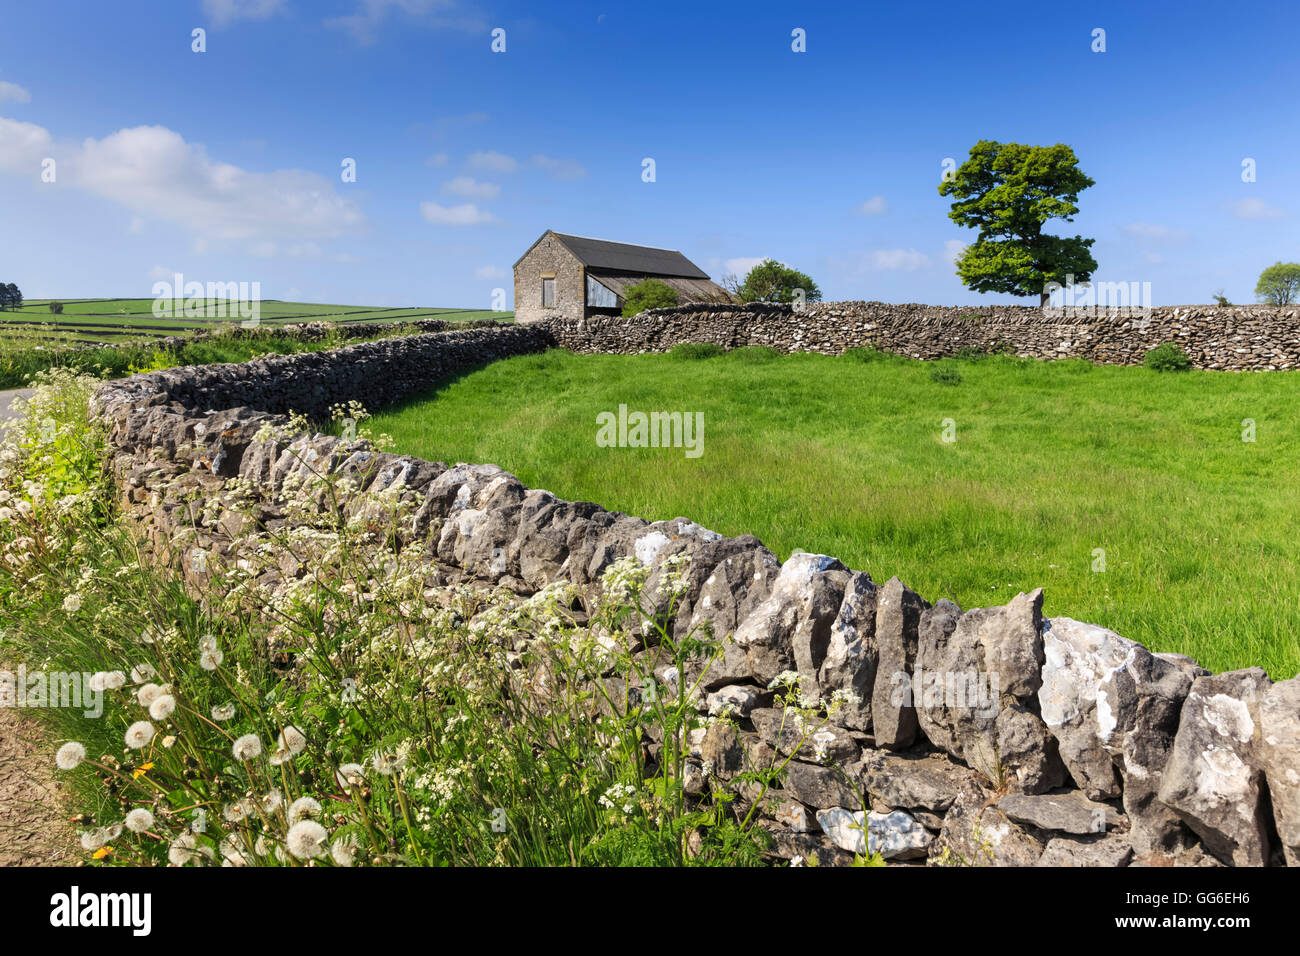 Typical spring landscape of country lane, dry stone walls, tree and barn, May, Litton, Peak District, Derbyshire, England, UK Stock Photo